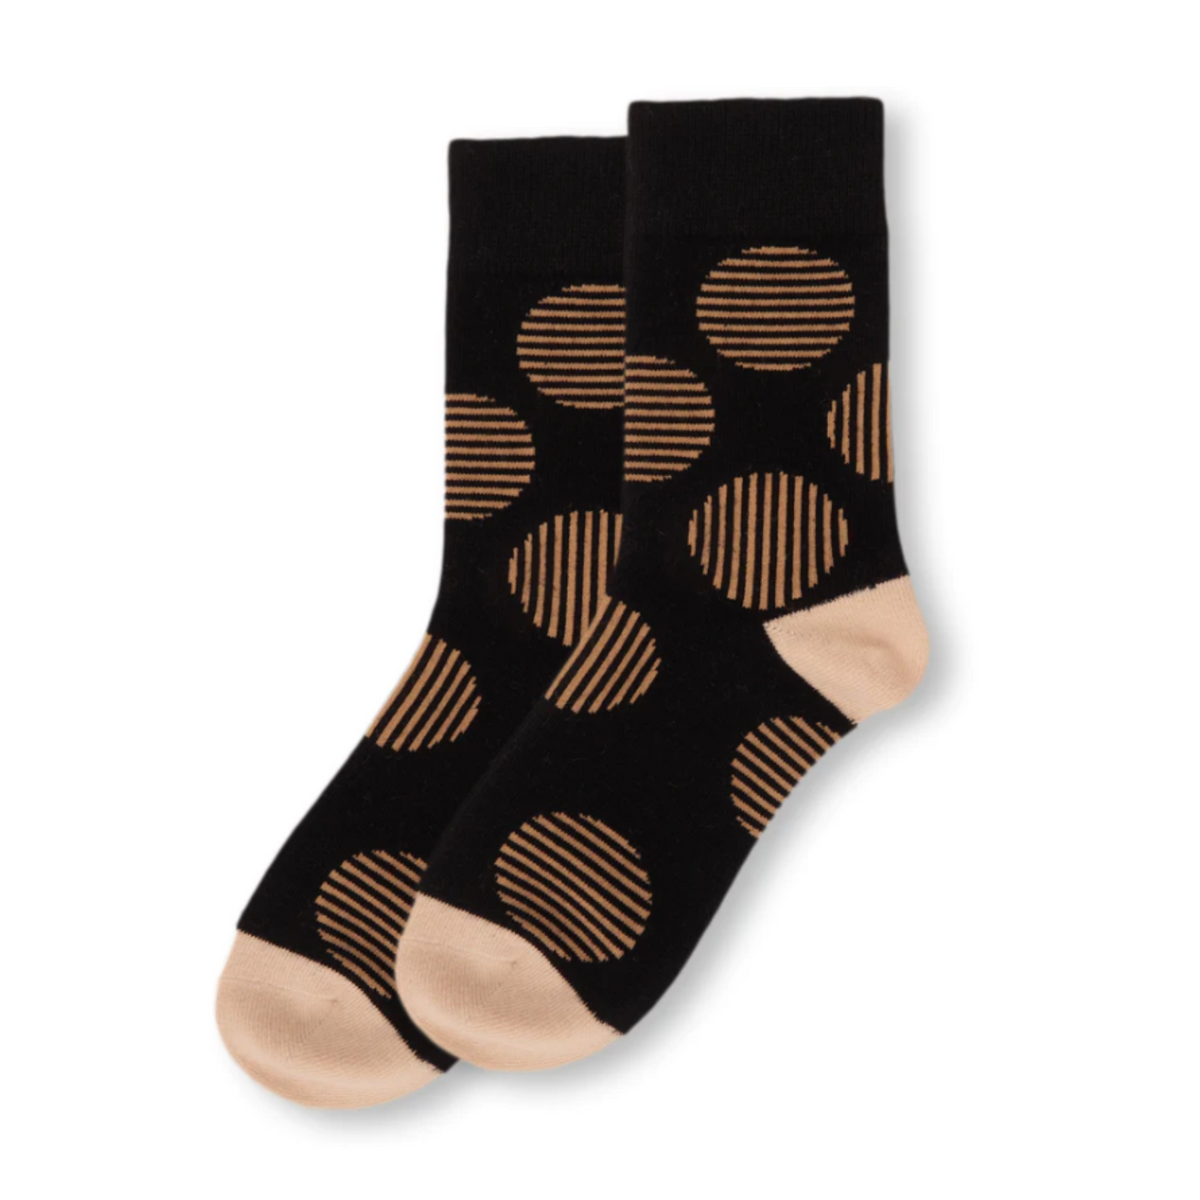 MeMoi Retro Circle women&#39;s Crew sock featuring black sock with brown stripes in circle patterns all over. Socks shown on display laying flat. 